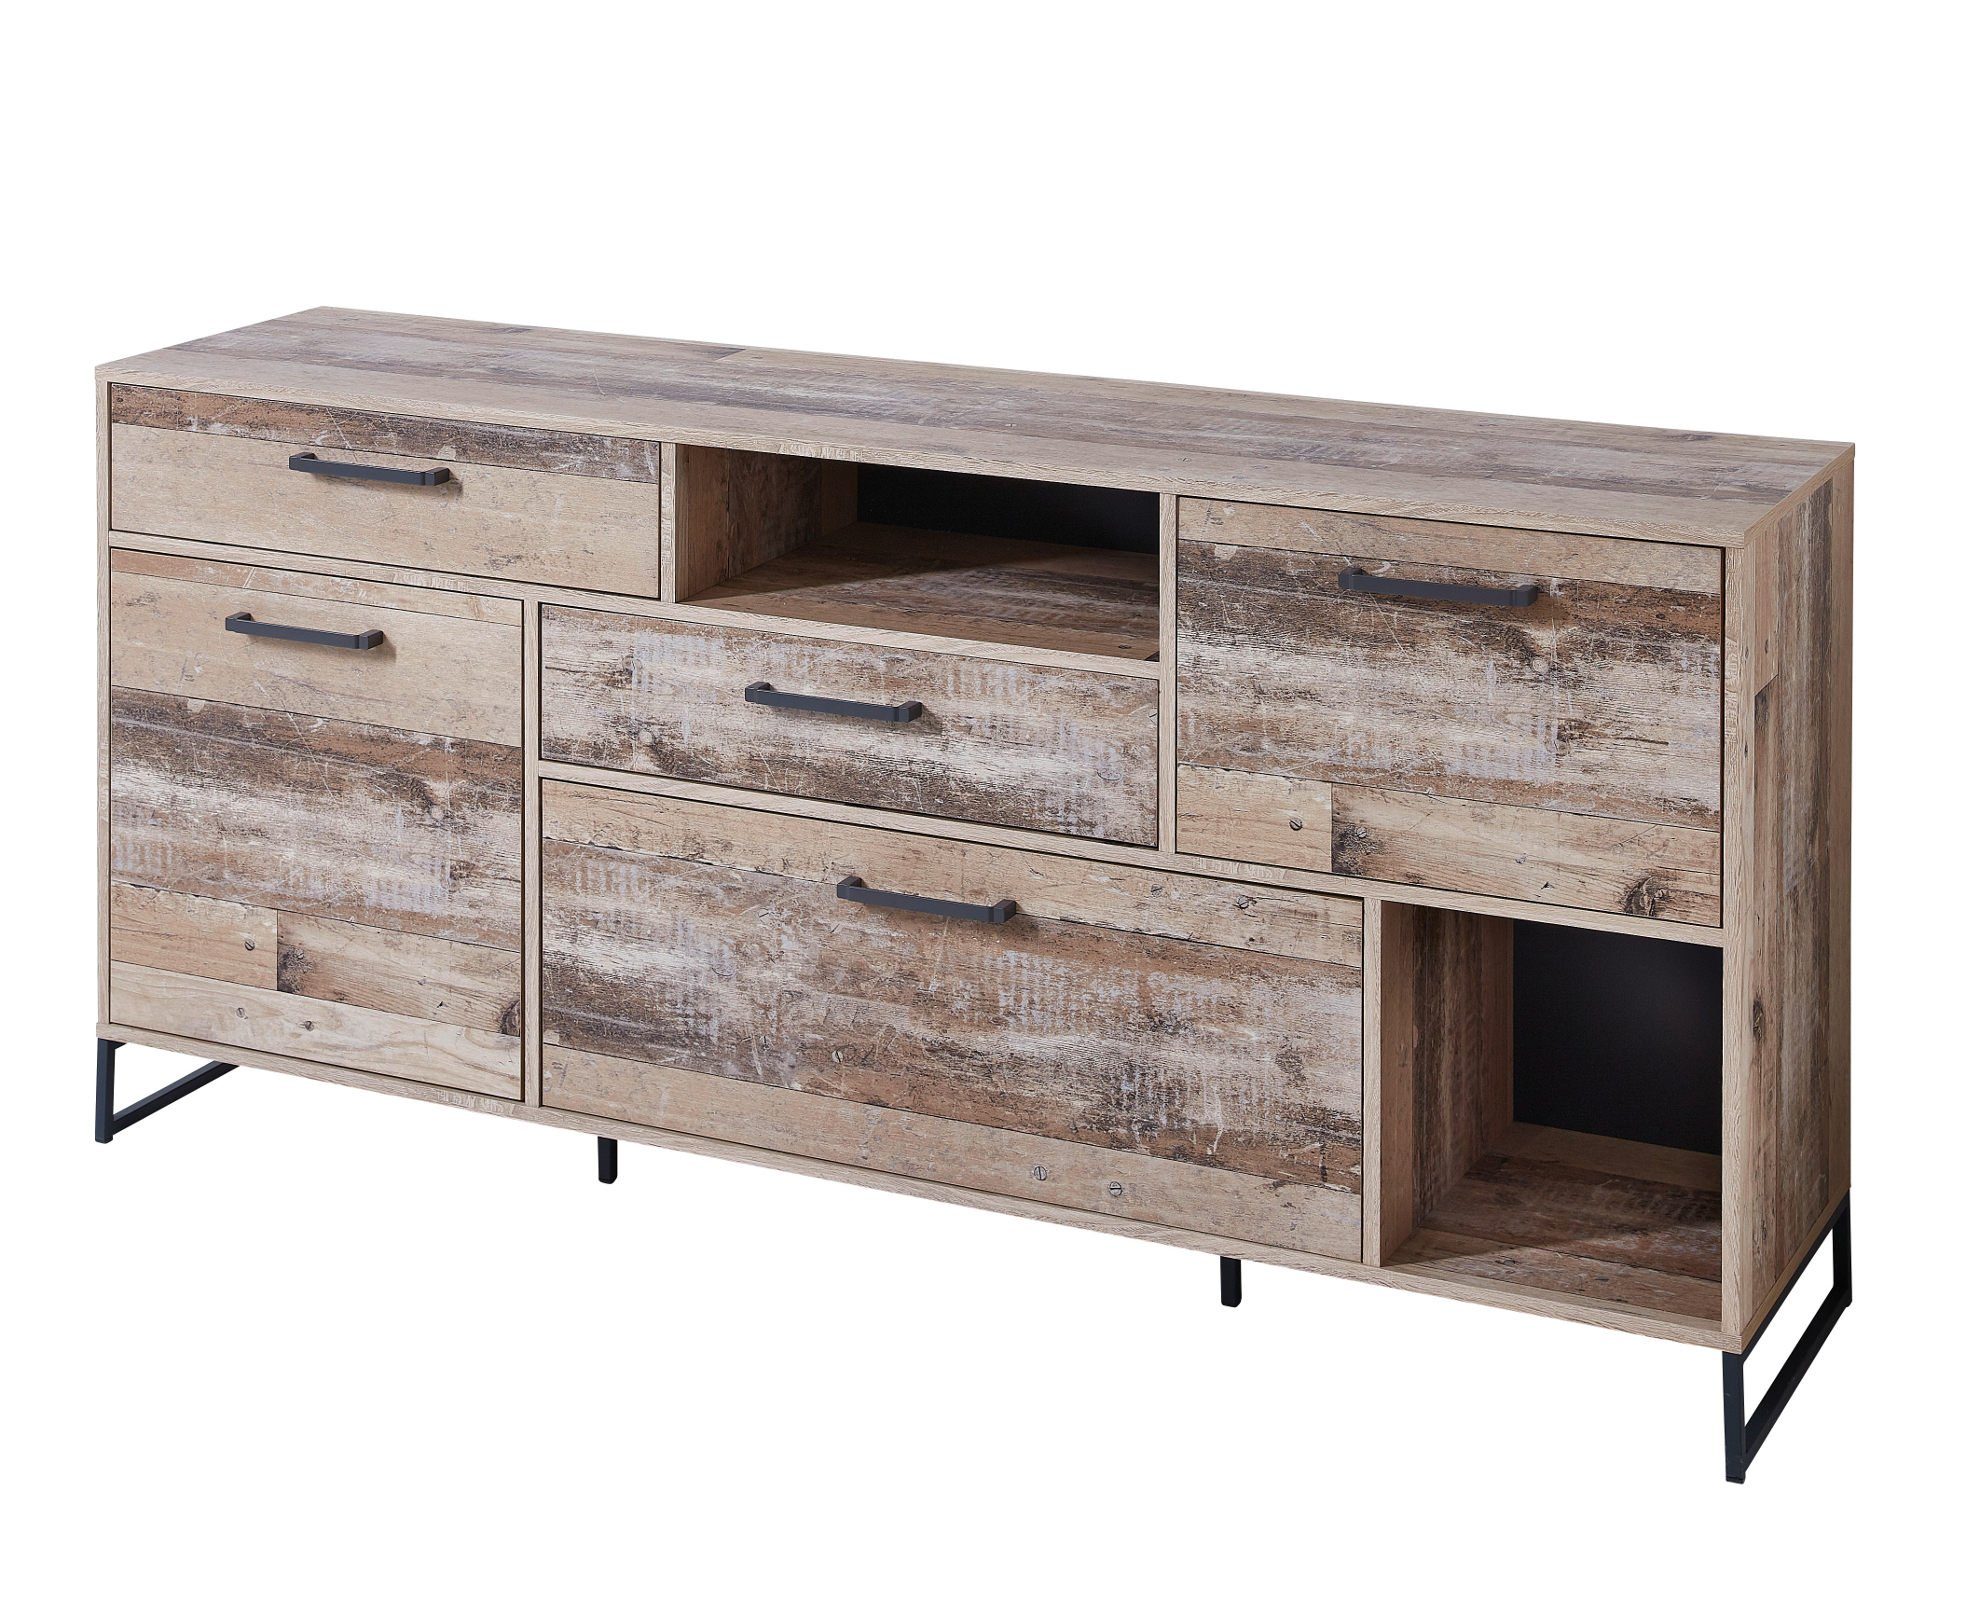 Breite cm, Roof, Höhe mix Tiefe Sideboard used Innostyle 81 Style cm, cm, 172 42